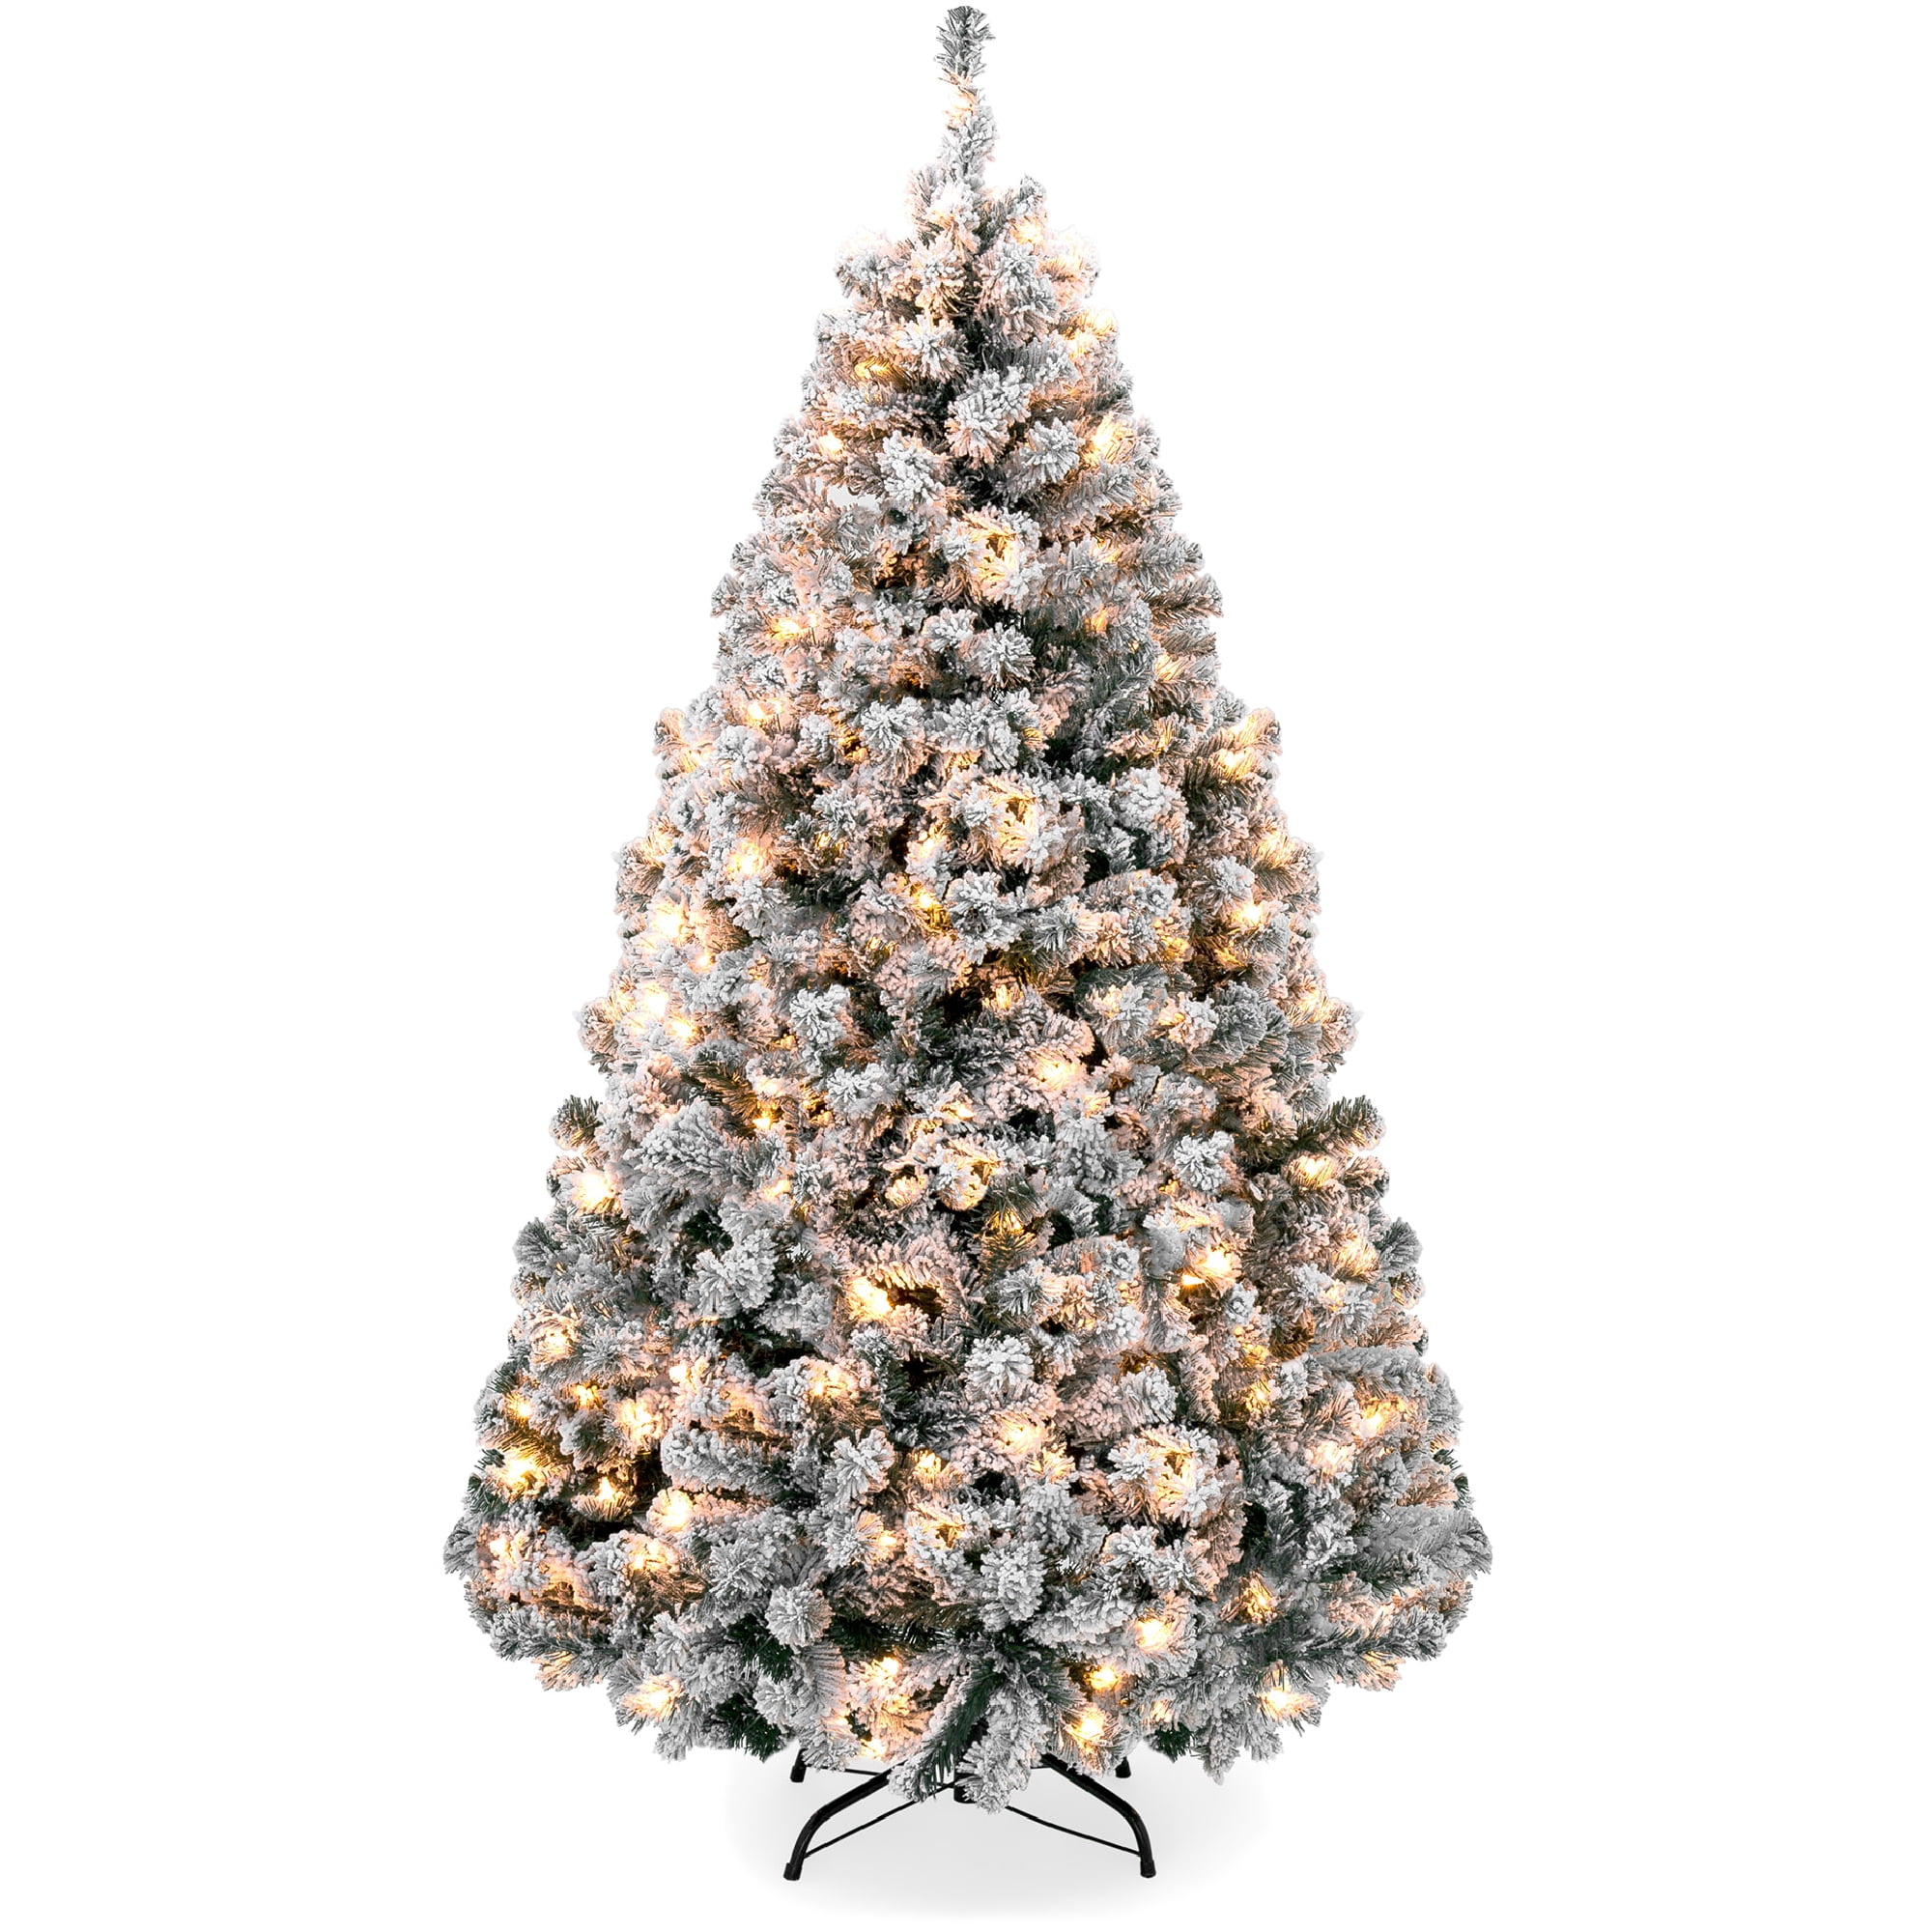 himaly 6feet Christmas Tree Artificial,720Tips Snow Flocked Christmas Pine Tree with Metal Stand,52Pine Cone,52Red Berries,Perfect for Xmas Decoration Indoor/Outdoor Holiday